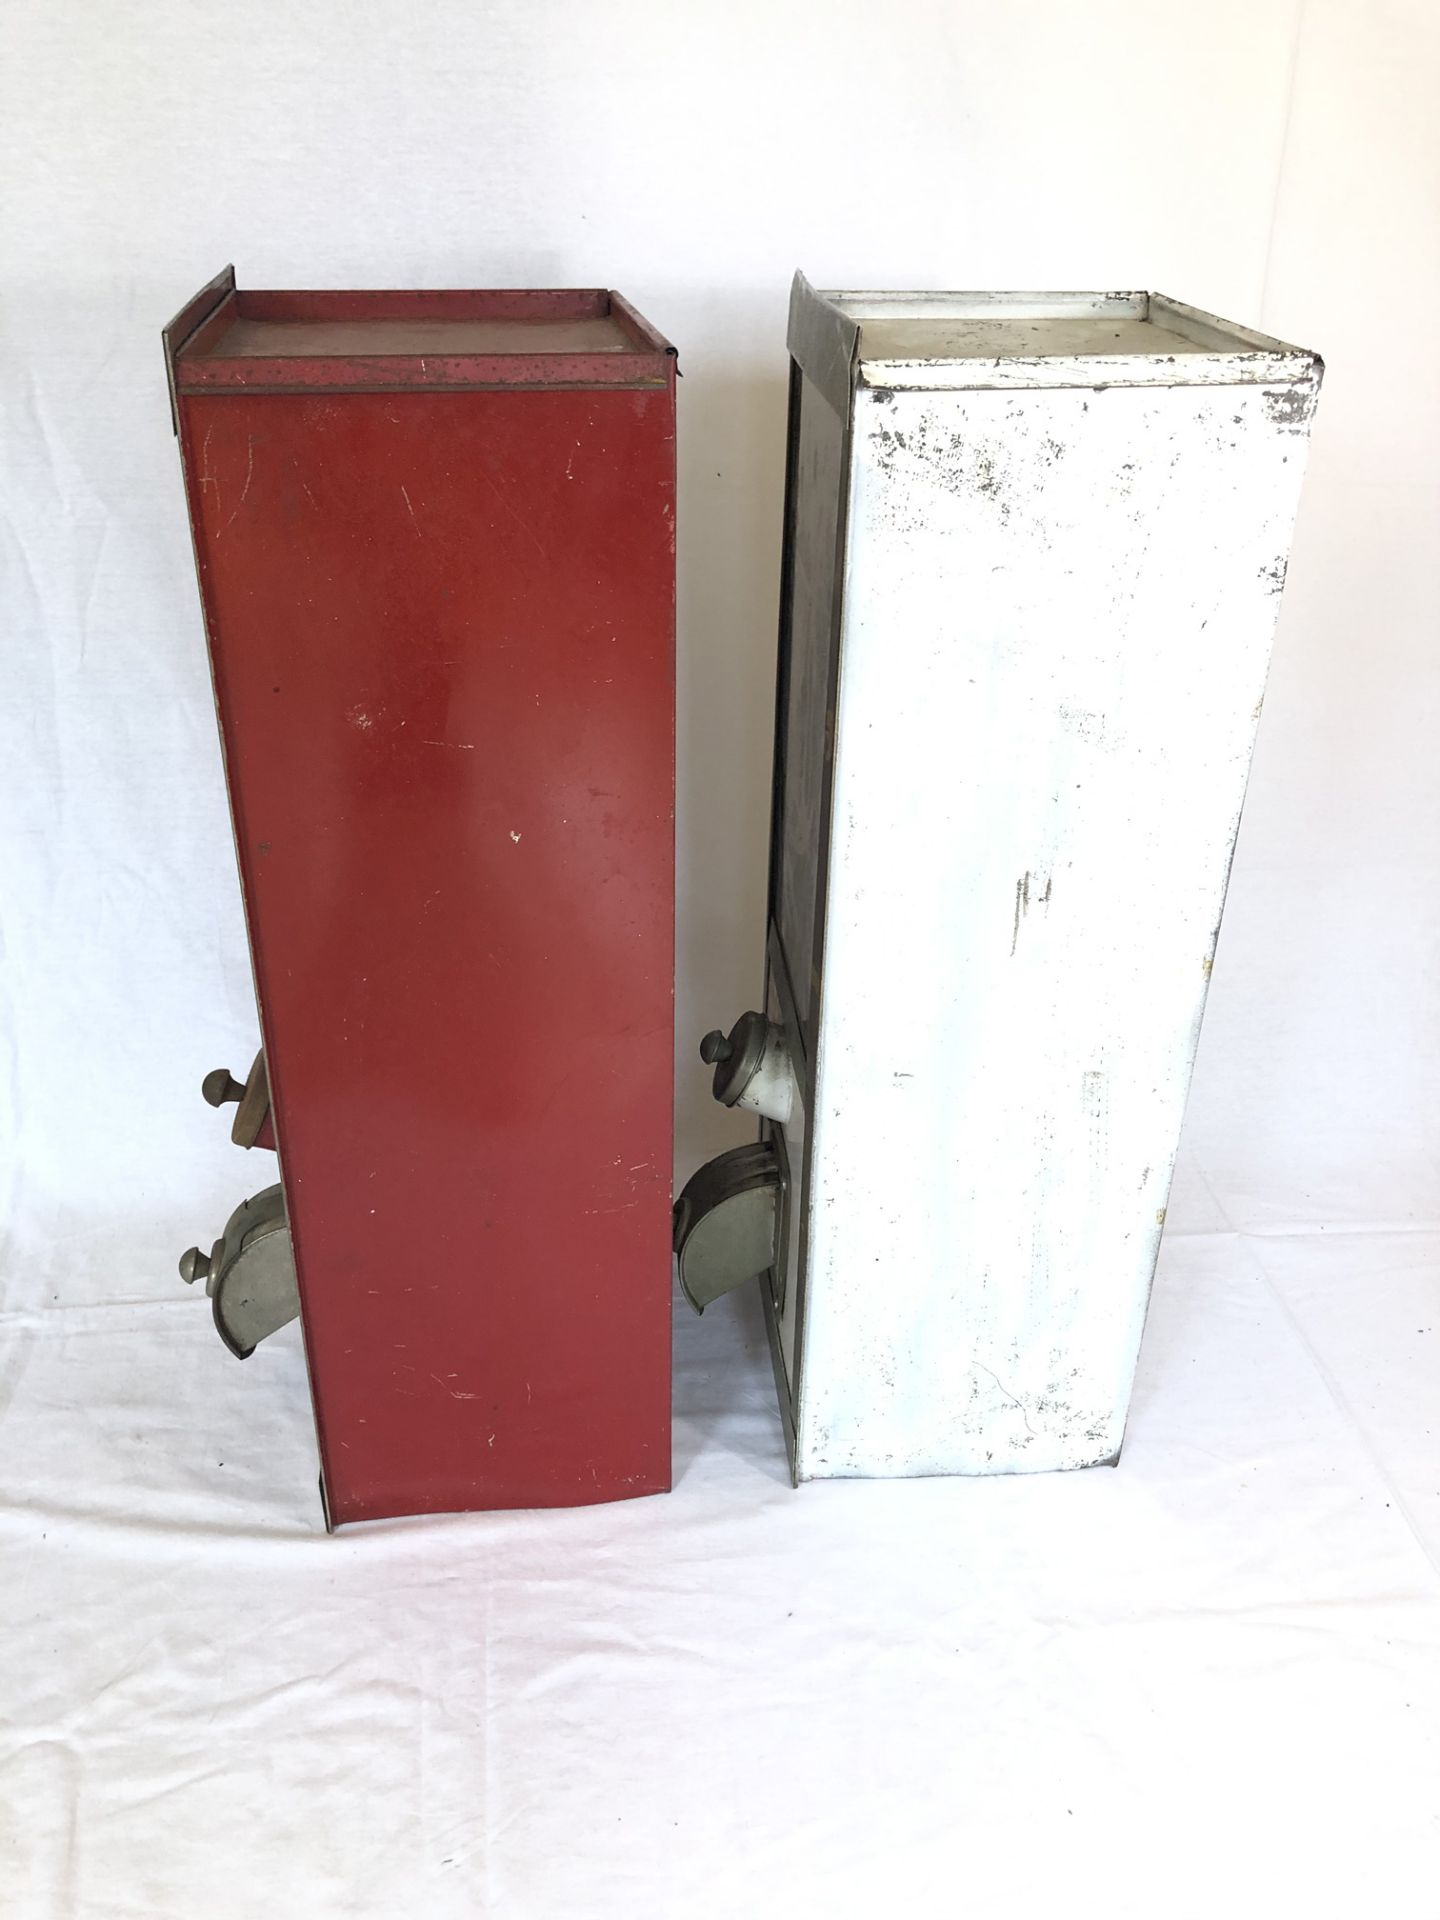 Lot of 2 vintage coffee bean dispensers from 1950s - Image 4 of 5